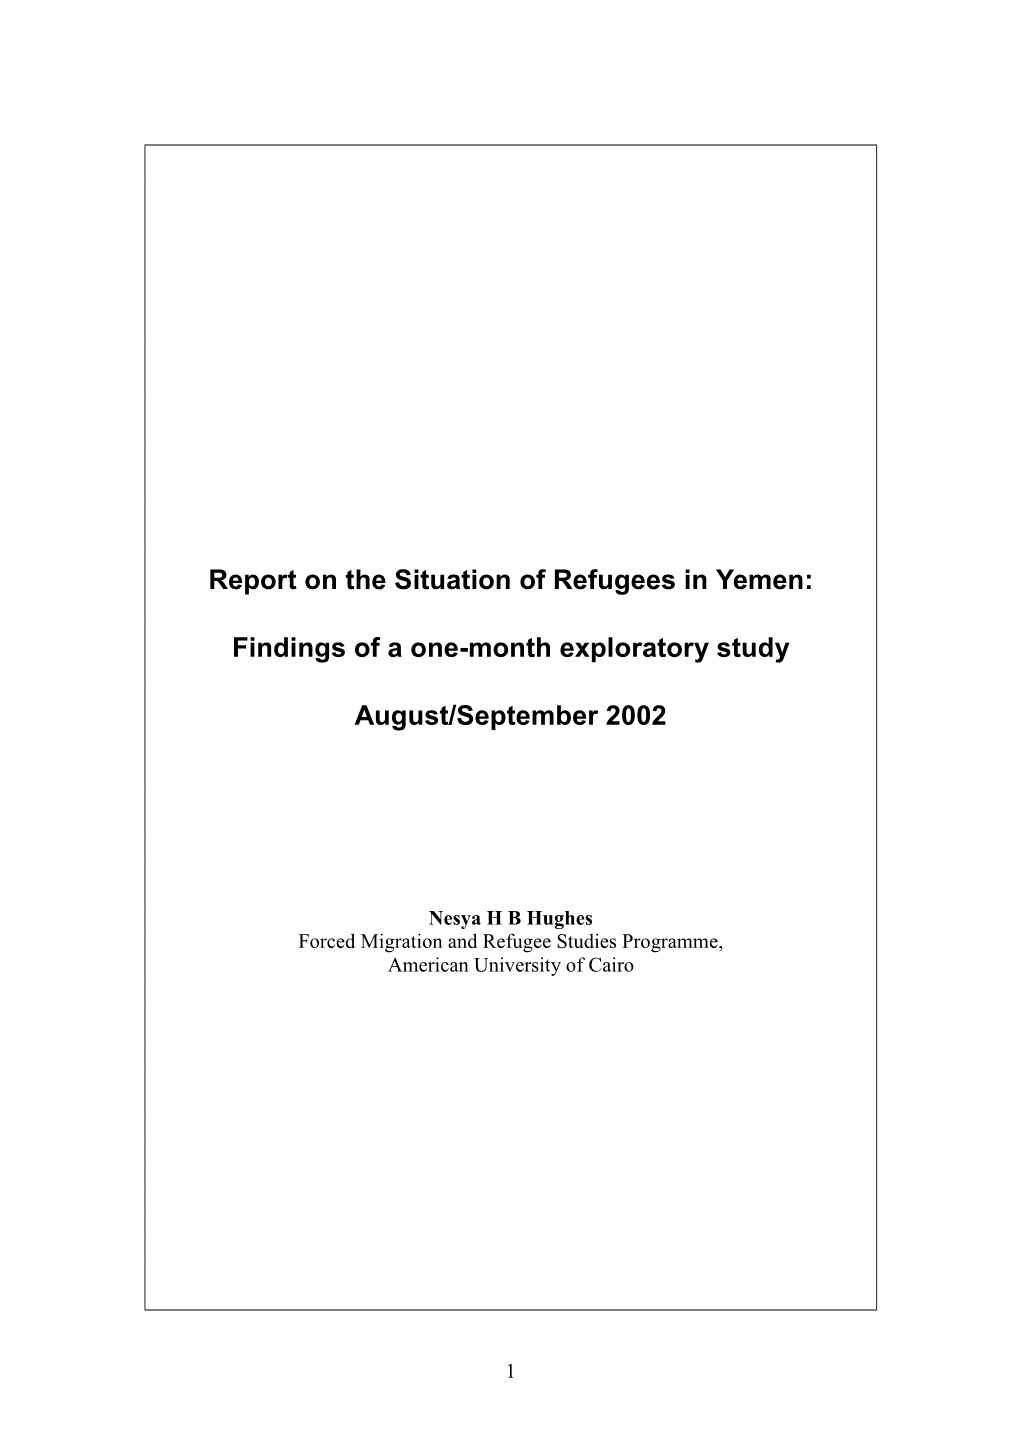 Report on the Situation of Refugees in Yemen: Findings of a One-Month Exploratory Study August/September 2002